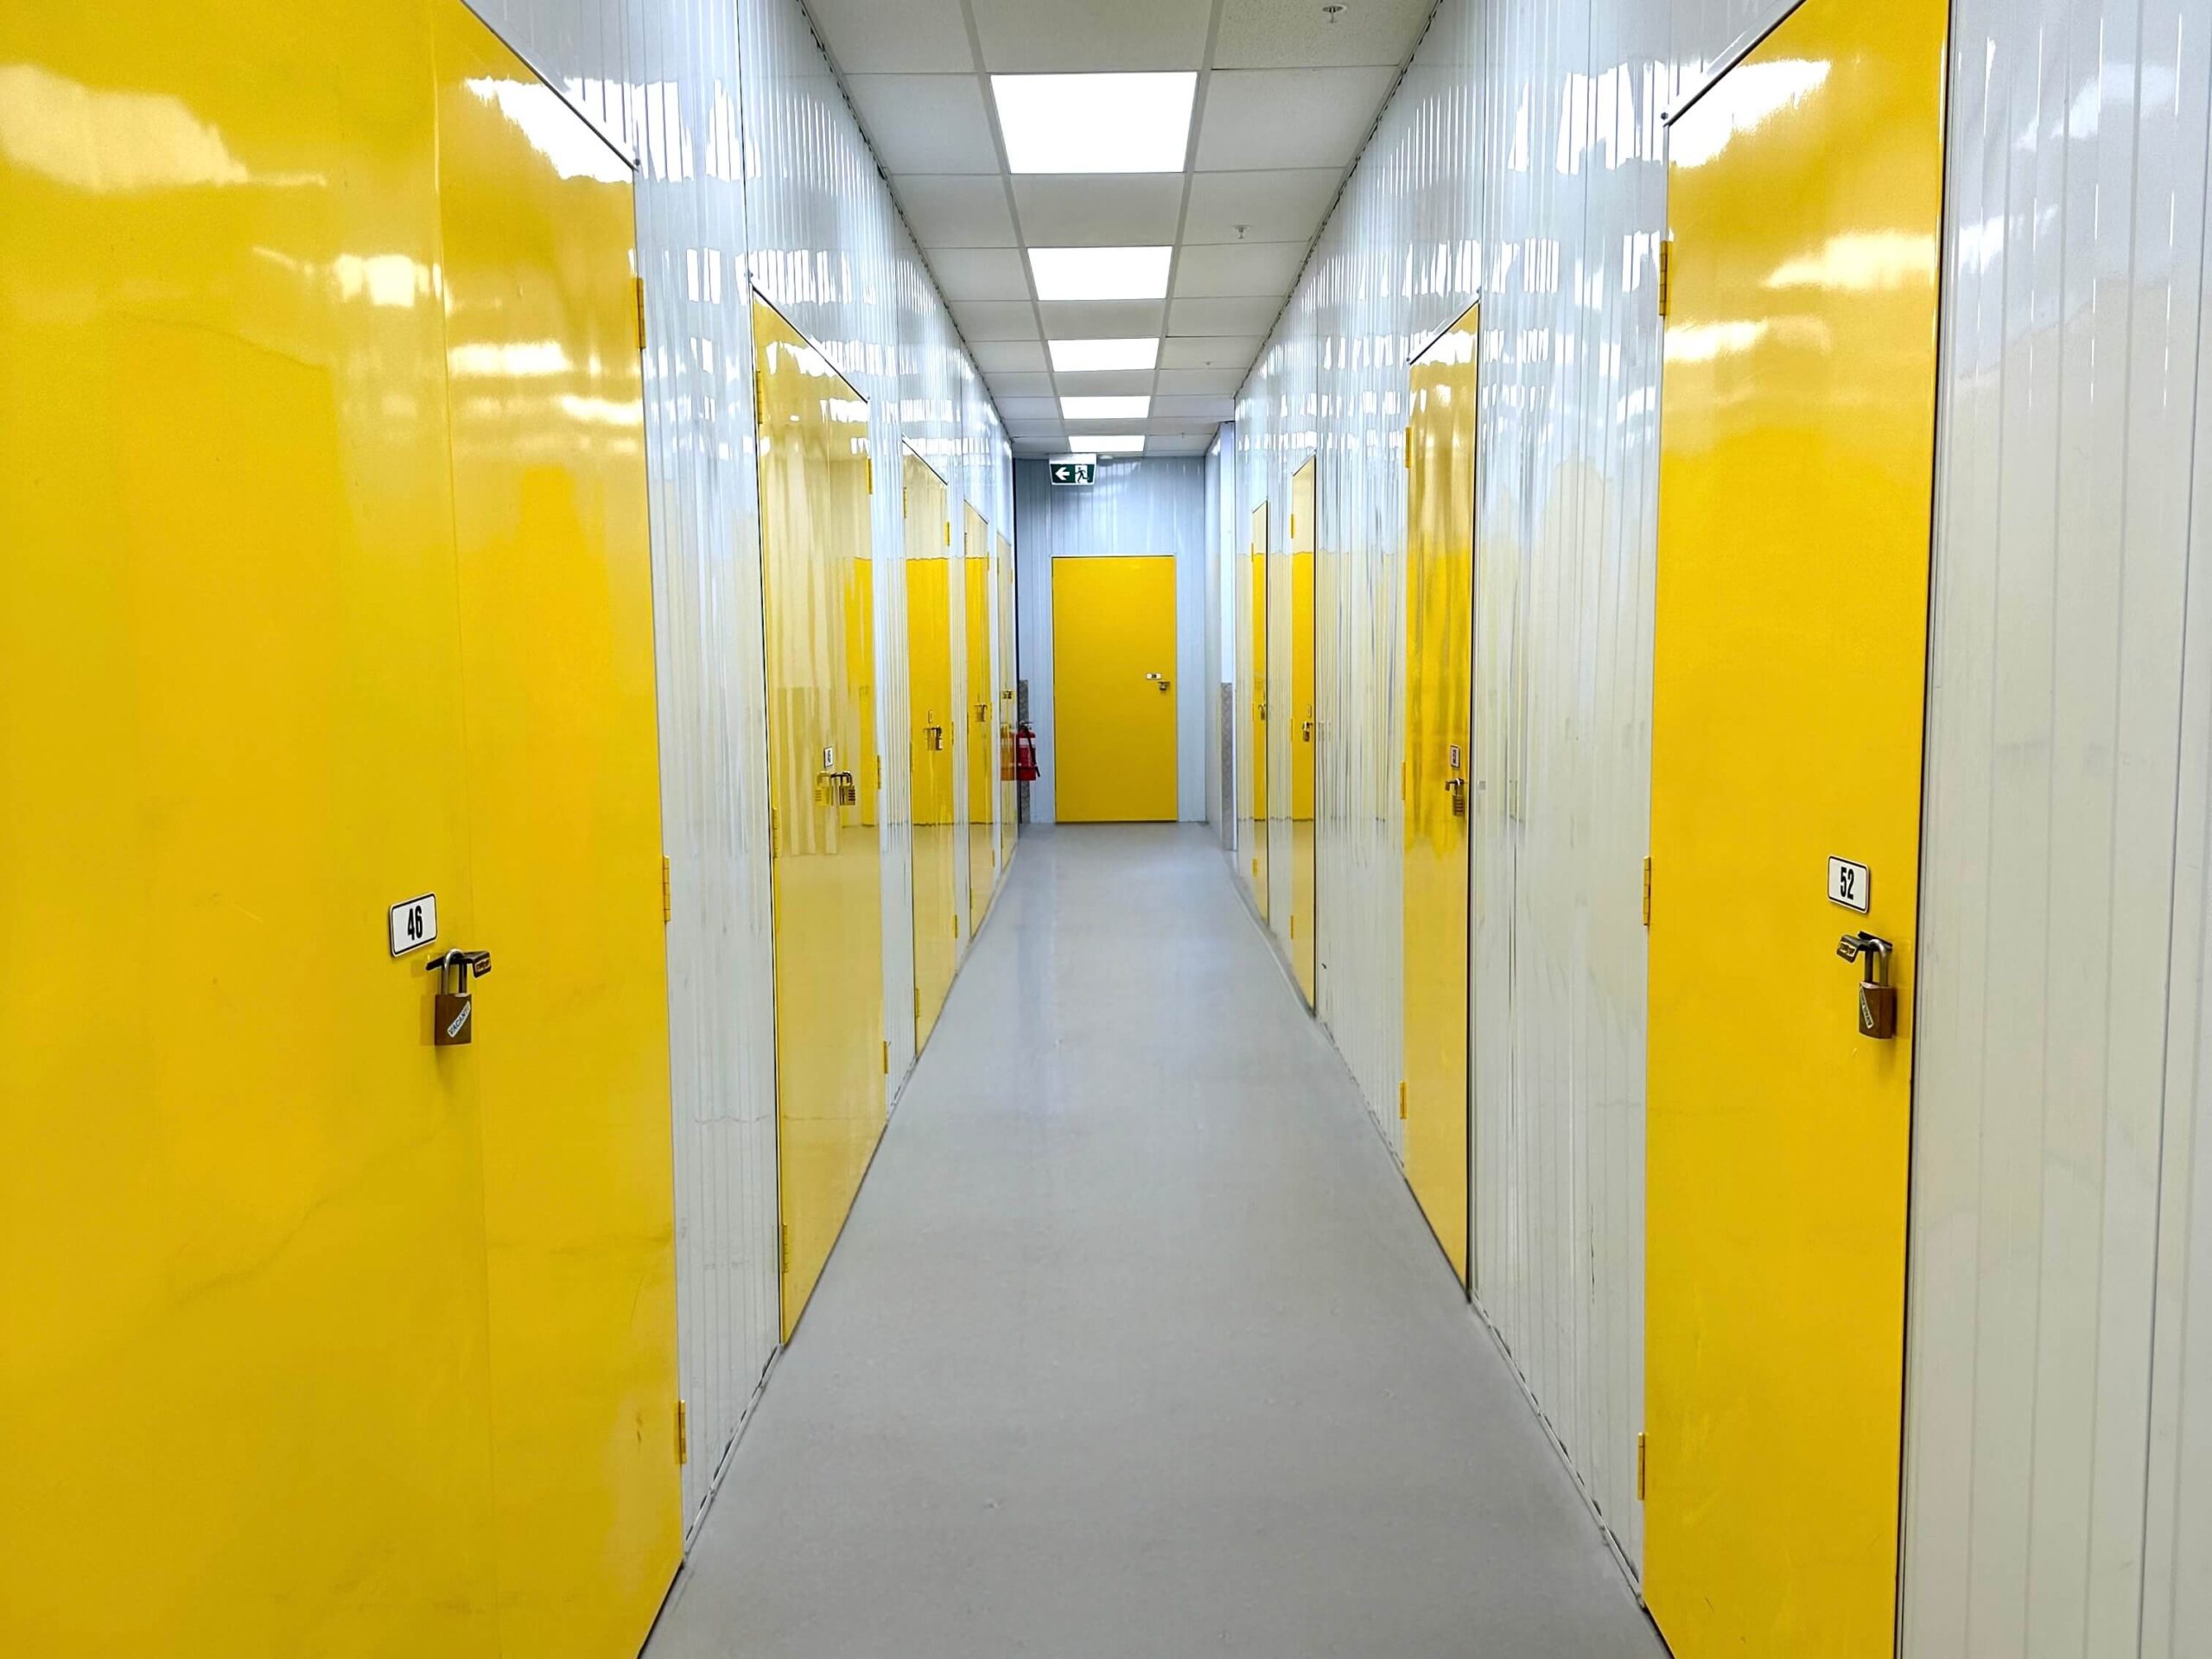 Brightly lit corridors at Wellington storage facility, ensuring a safe and inviting environment for customers.